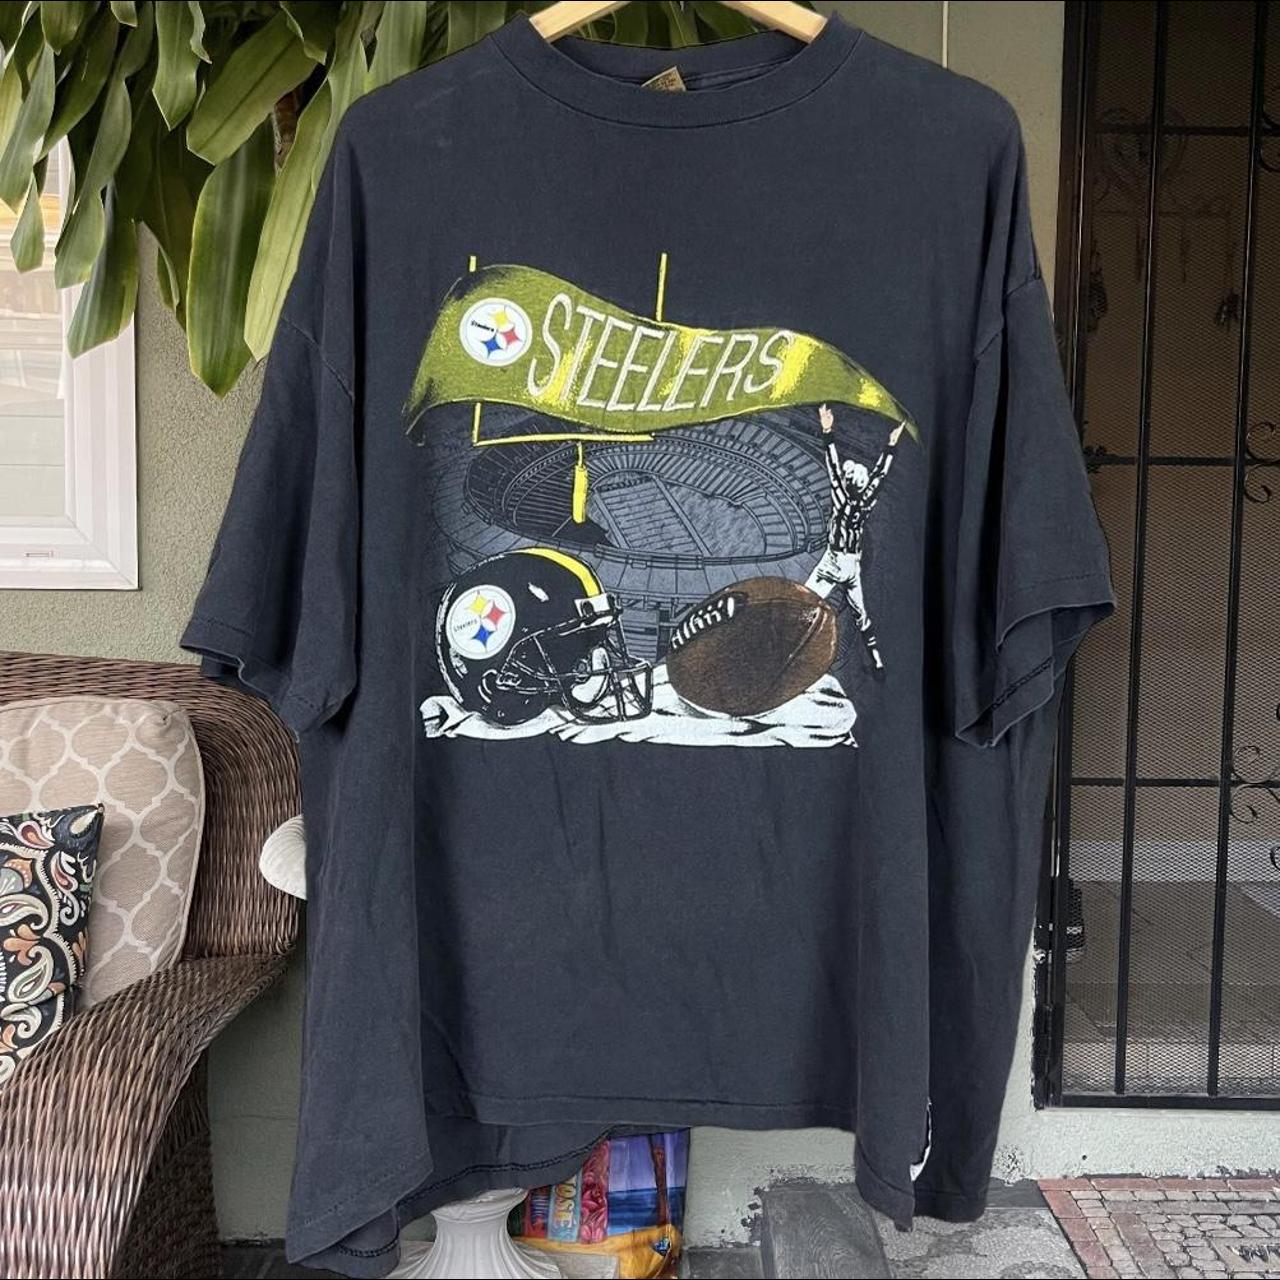 Vintage 90s Clothing NFL Pittsburgh Steelers Football Men Size 